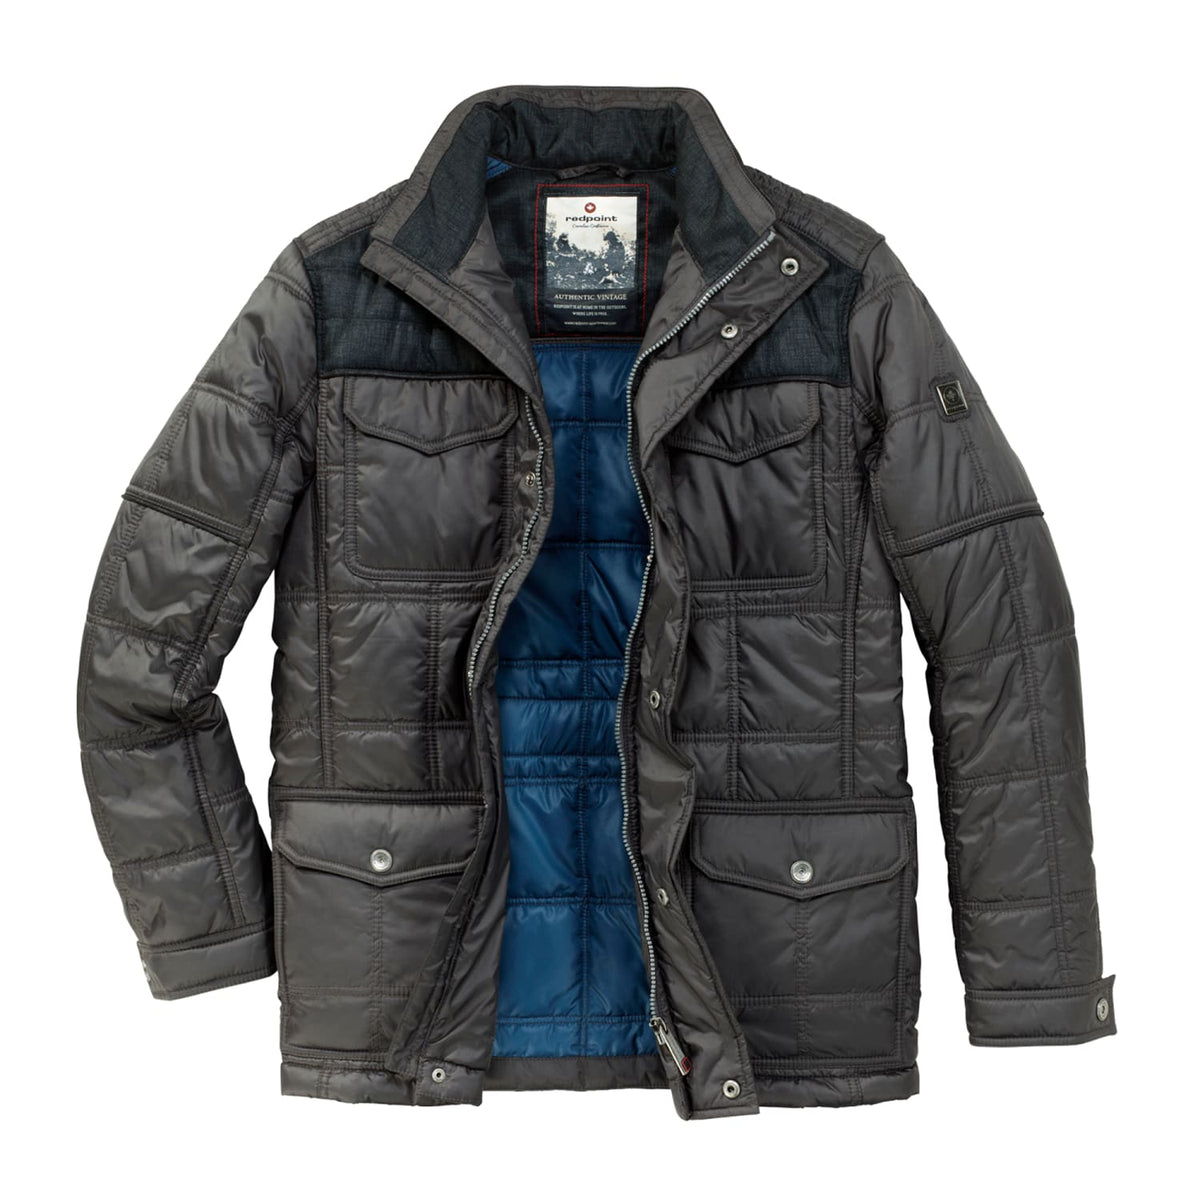 Big Men's Redpoint Padded Coat - Rough - Navy | 2XL to 5XL - fatboys95